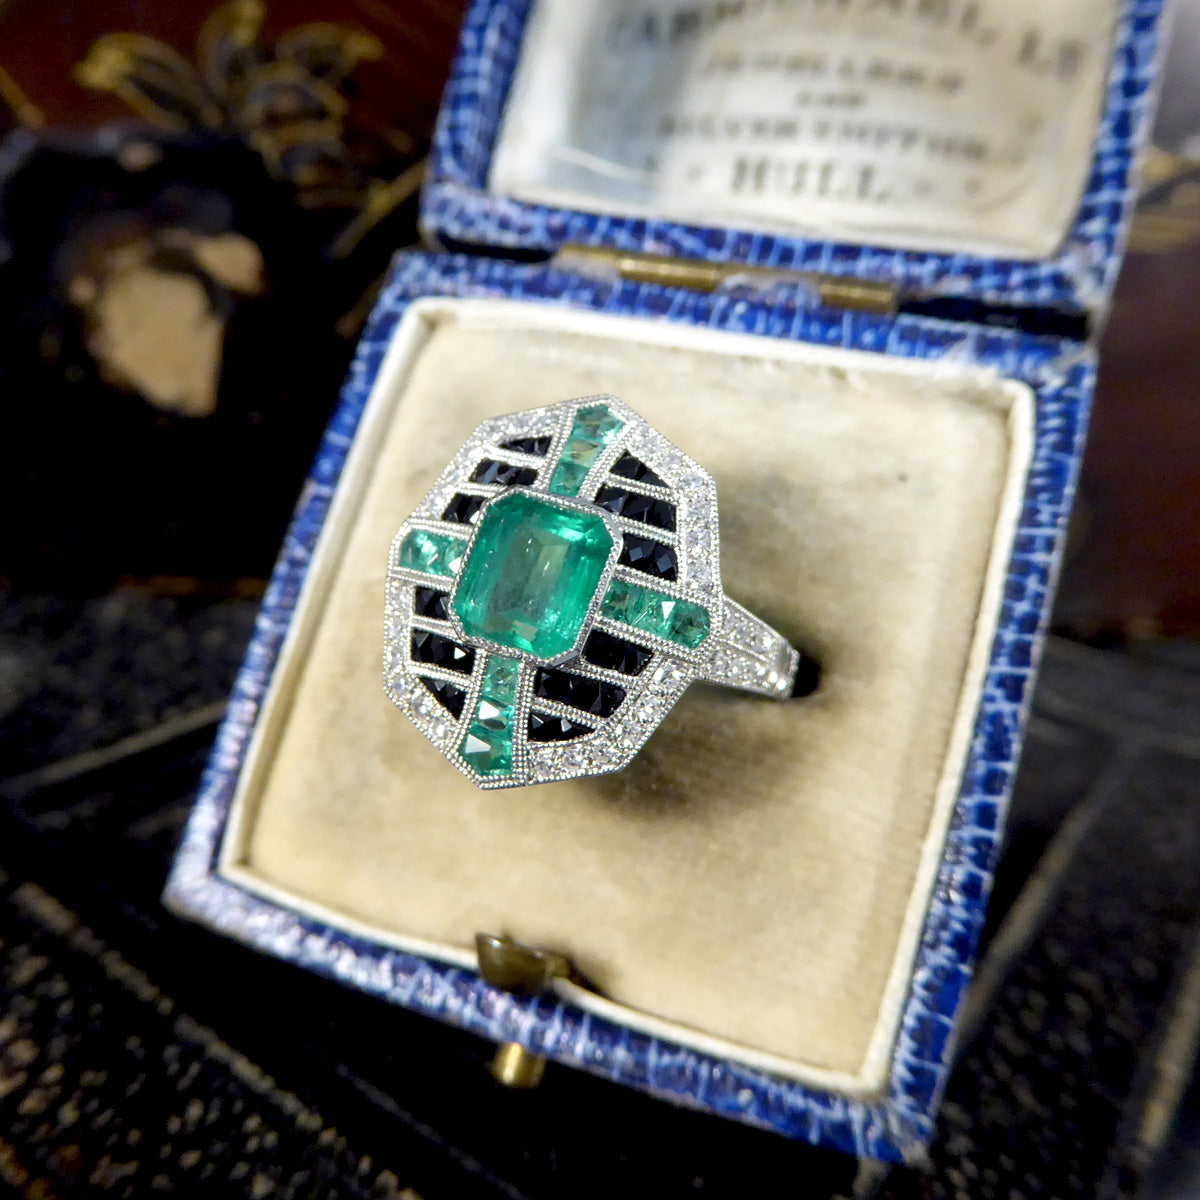 Art Deco Style Vintage Emerald Onyx and Diamond Geometric Cluster Ring in Platinum